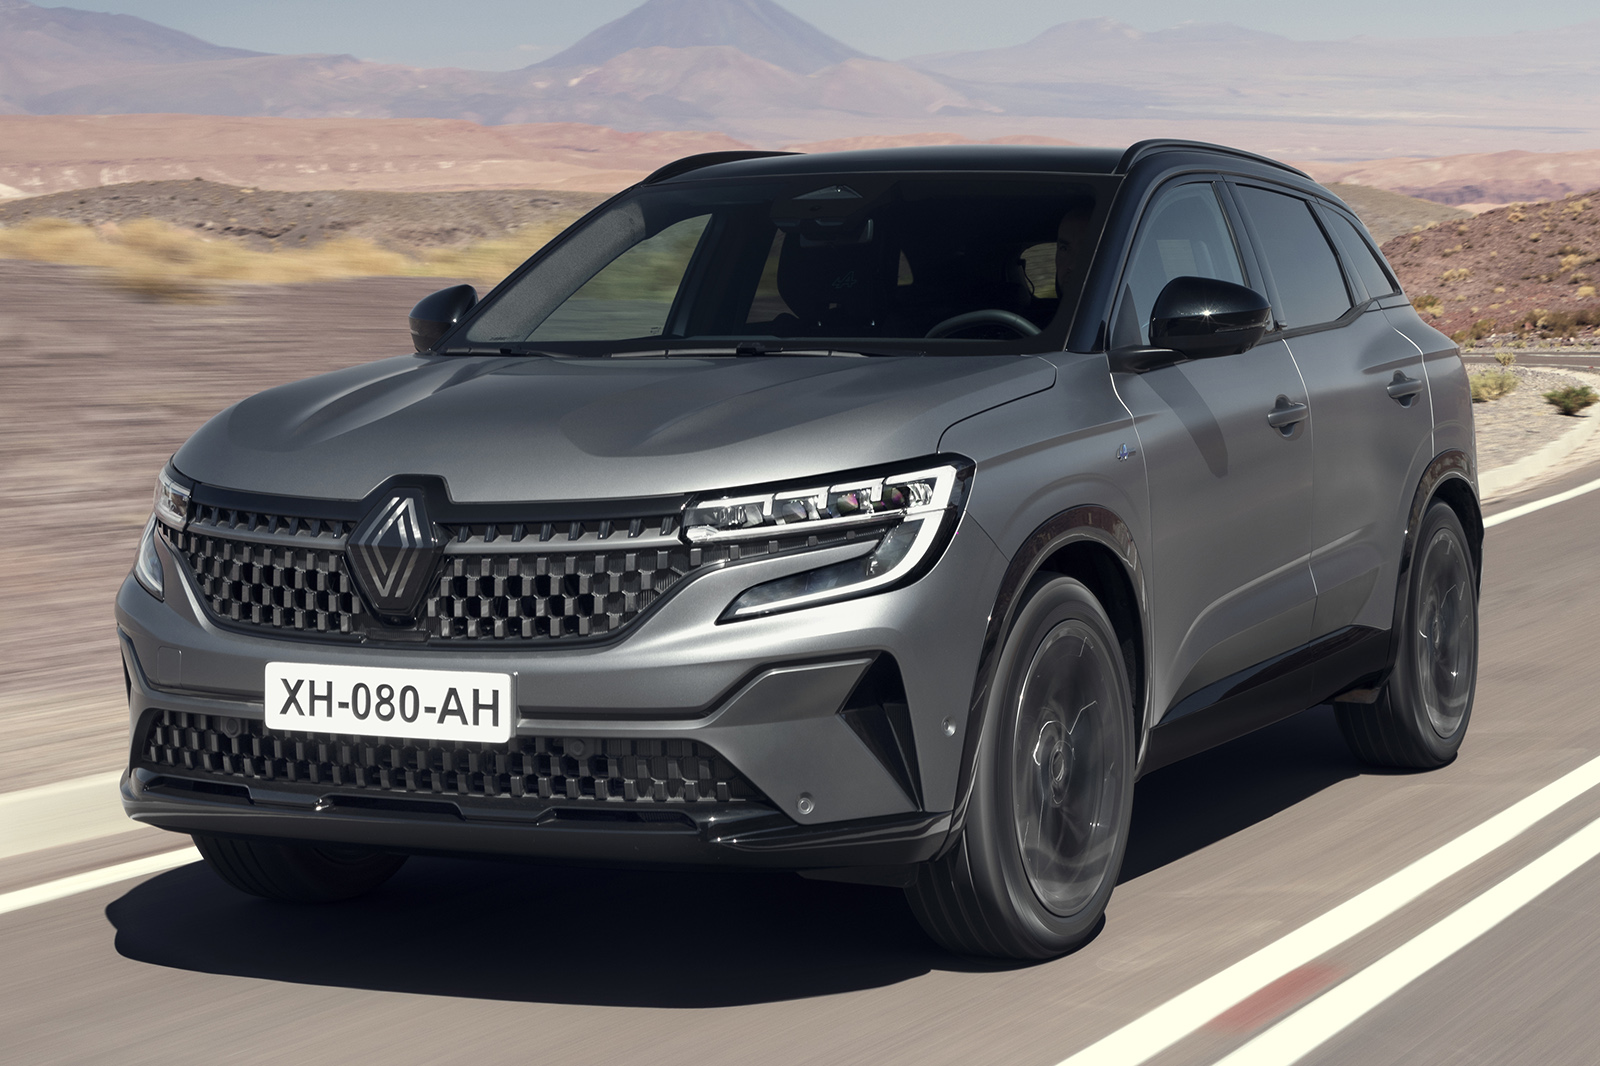 Renault Austral overtakes Peugeot 3008, The SUV War Continues